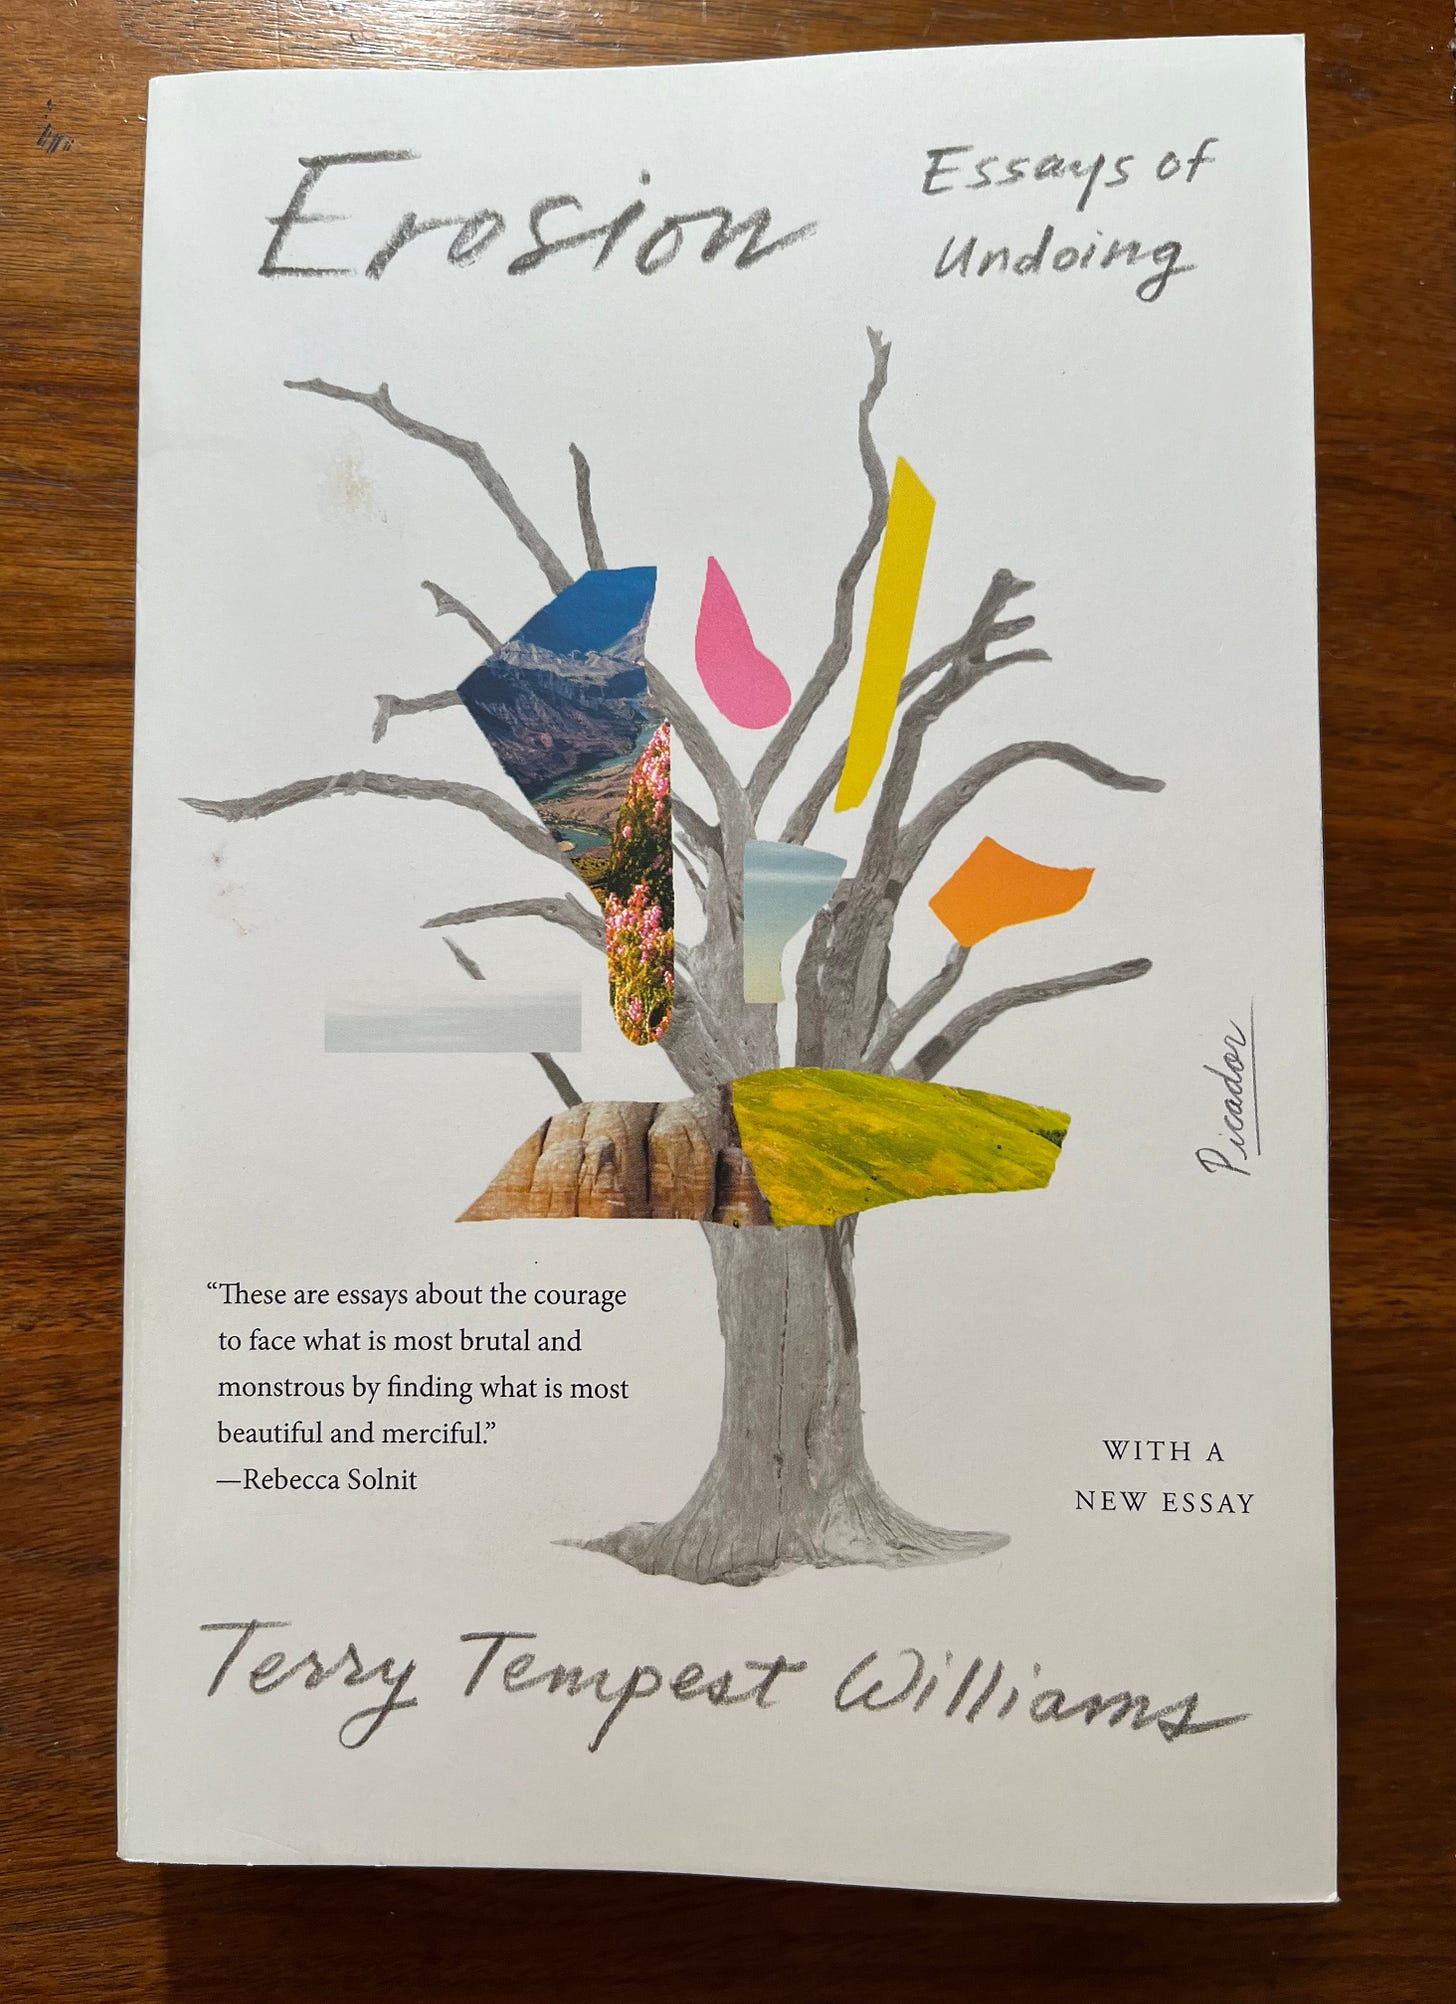 Book titled Erosion, by Terry Tempest Williams